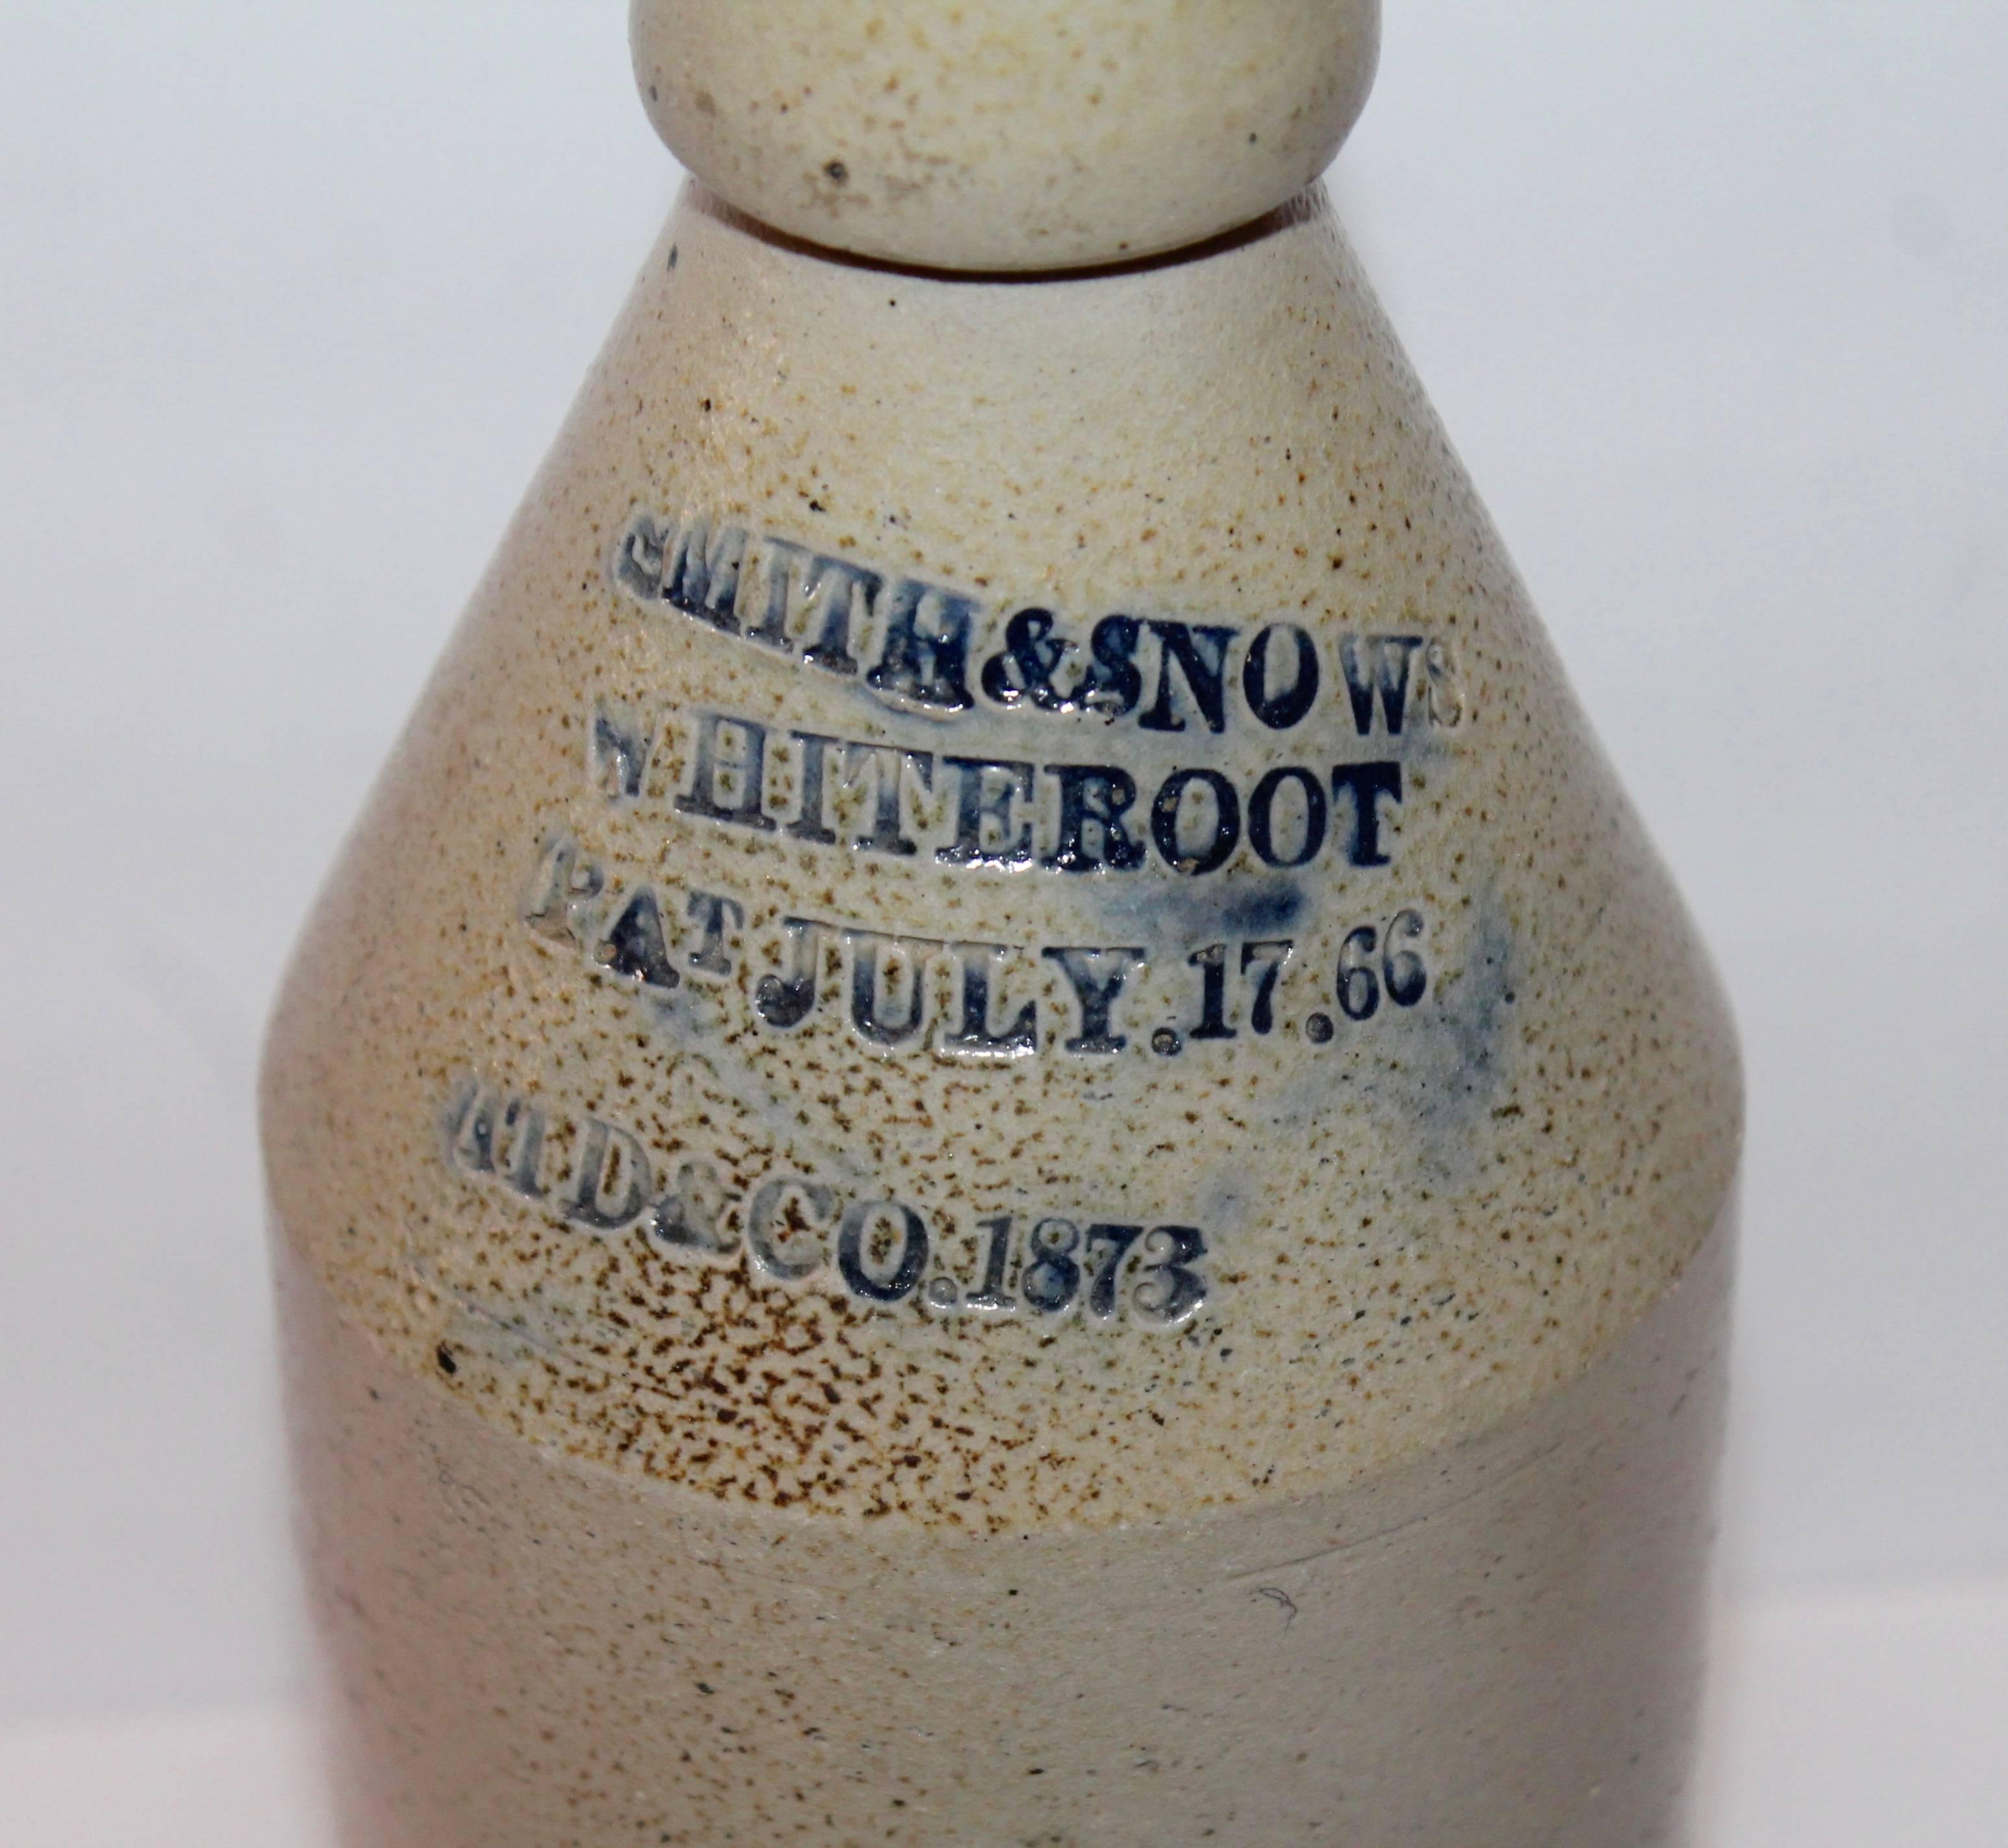 This early handmade pottery bitters bottle is signed and dated by the maker Pat. July. 17. 66 and Patd. & Co. 1873 . This pottery bottle is in pristine condition.